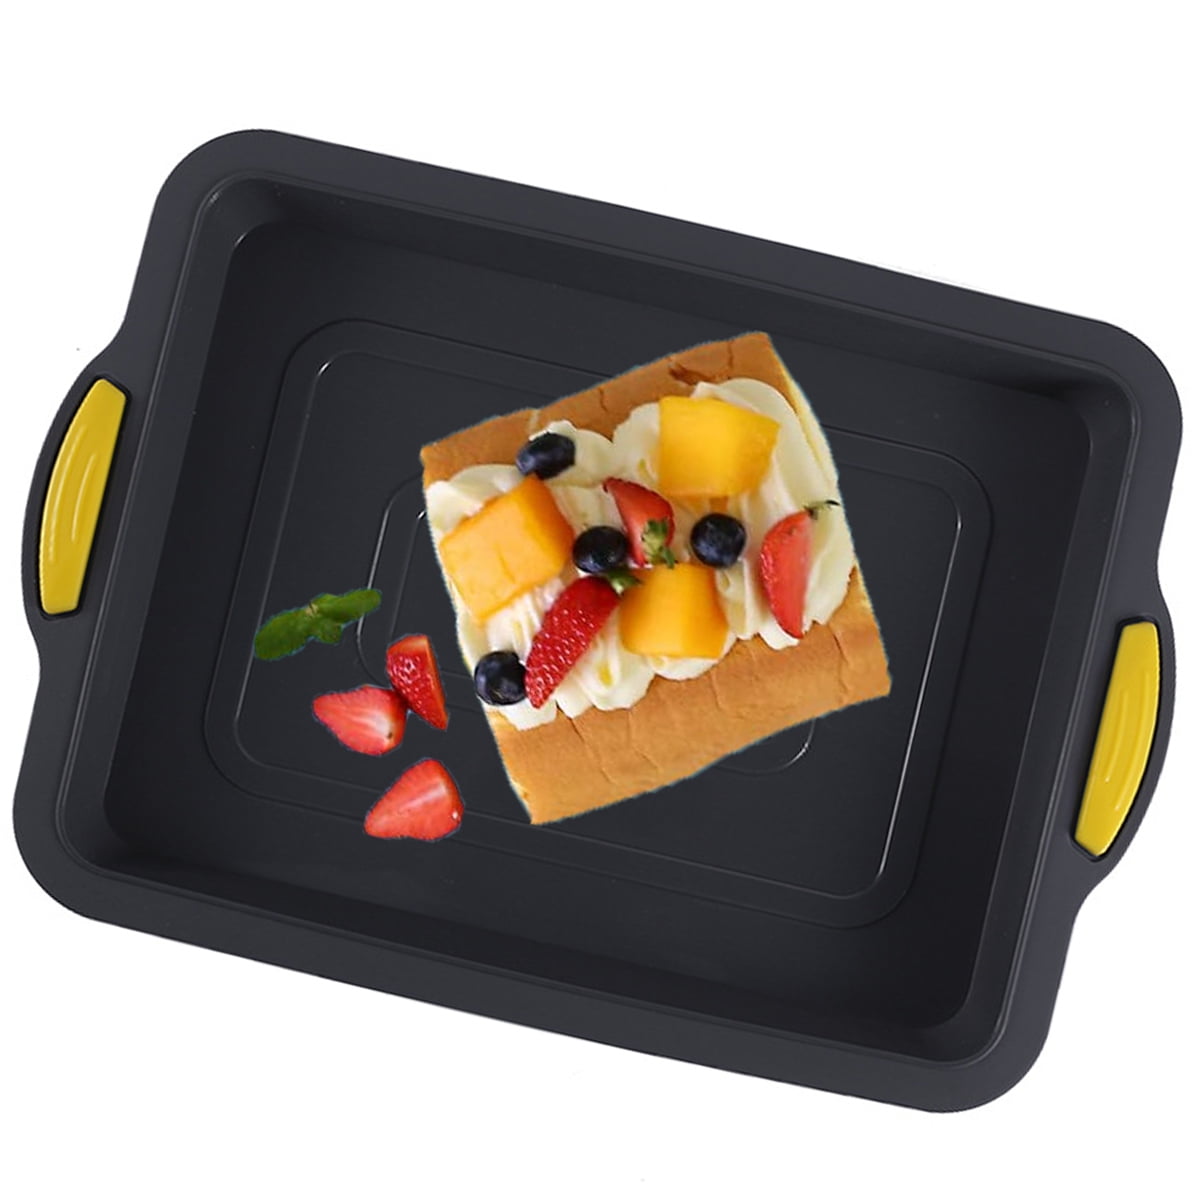 Non Stick Silicone Brownie Baking Pan With Handles - Steel Frame Inside,  Rectangular Cookie Baking Sheet/Jelly Roll Tray Set Nonstick, 13x9 in -  Dark gray + yellow shank (unframed) 